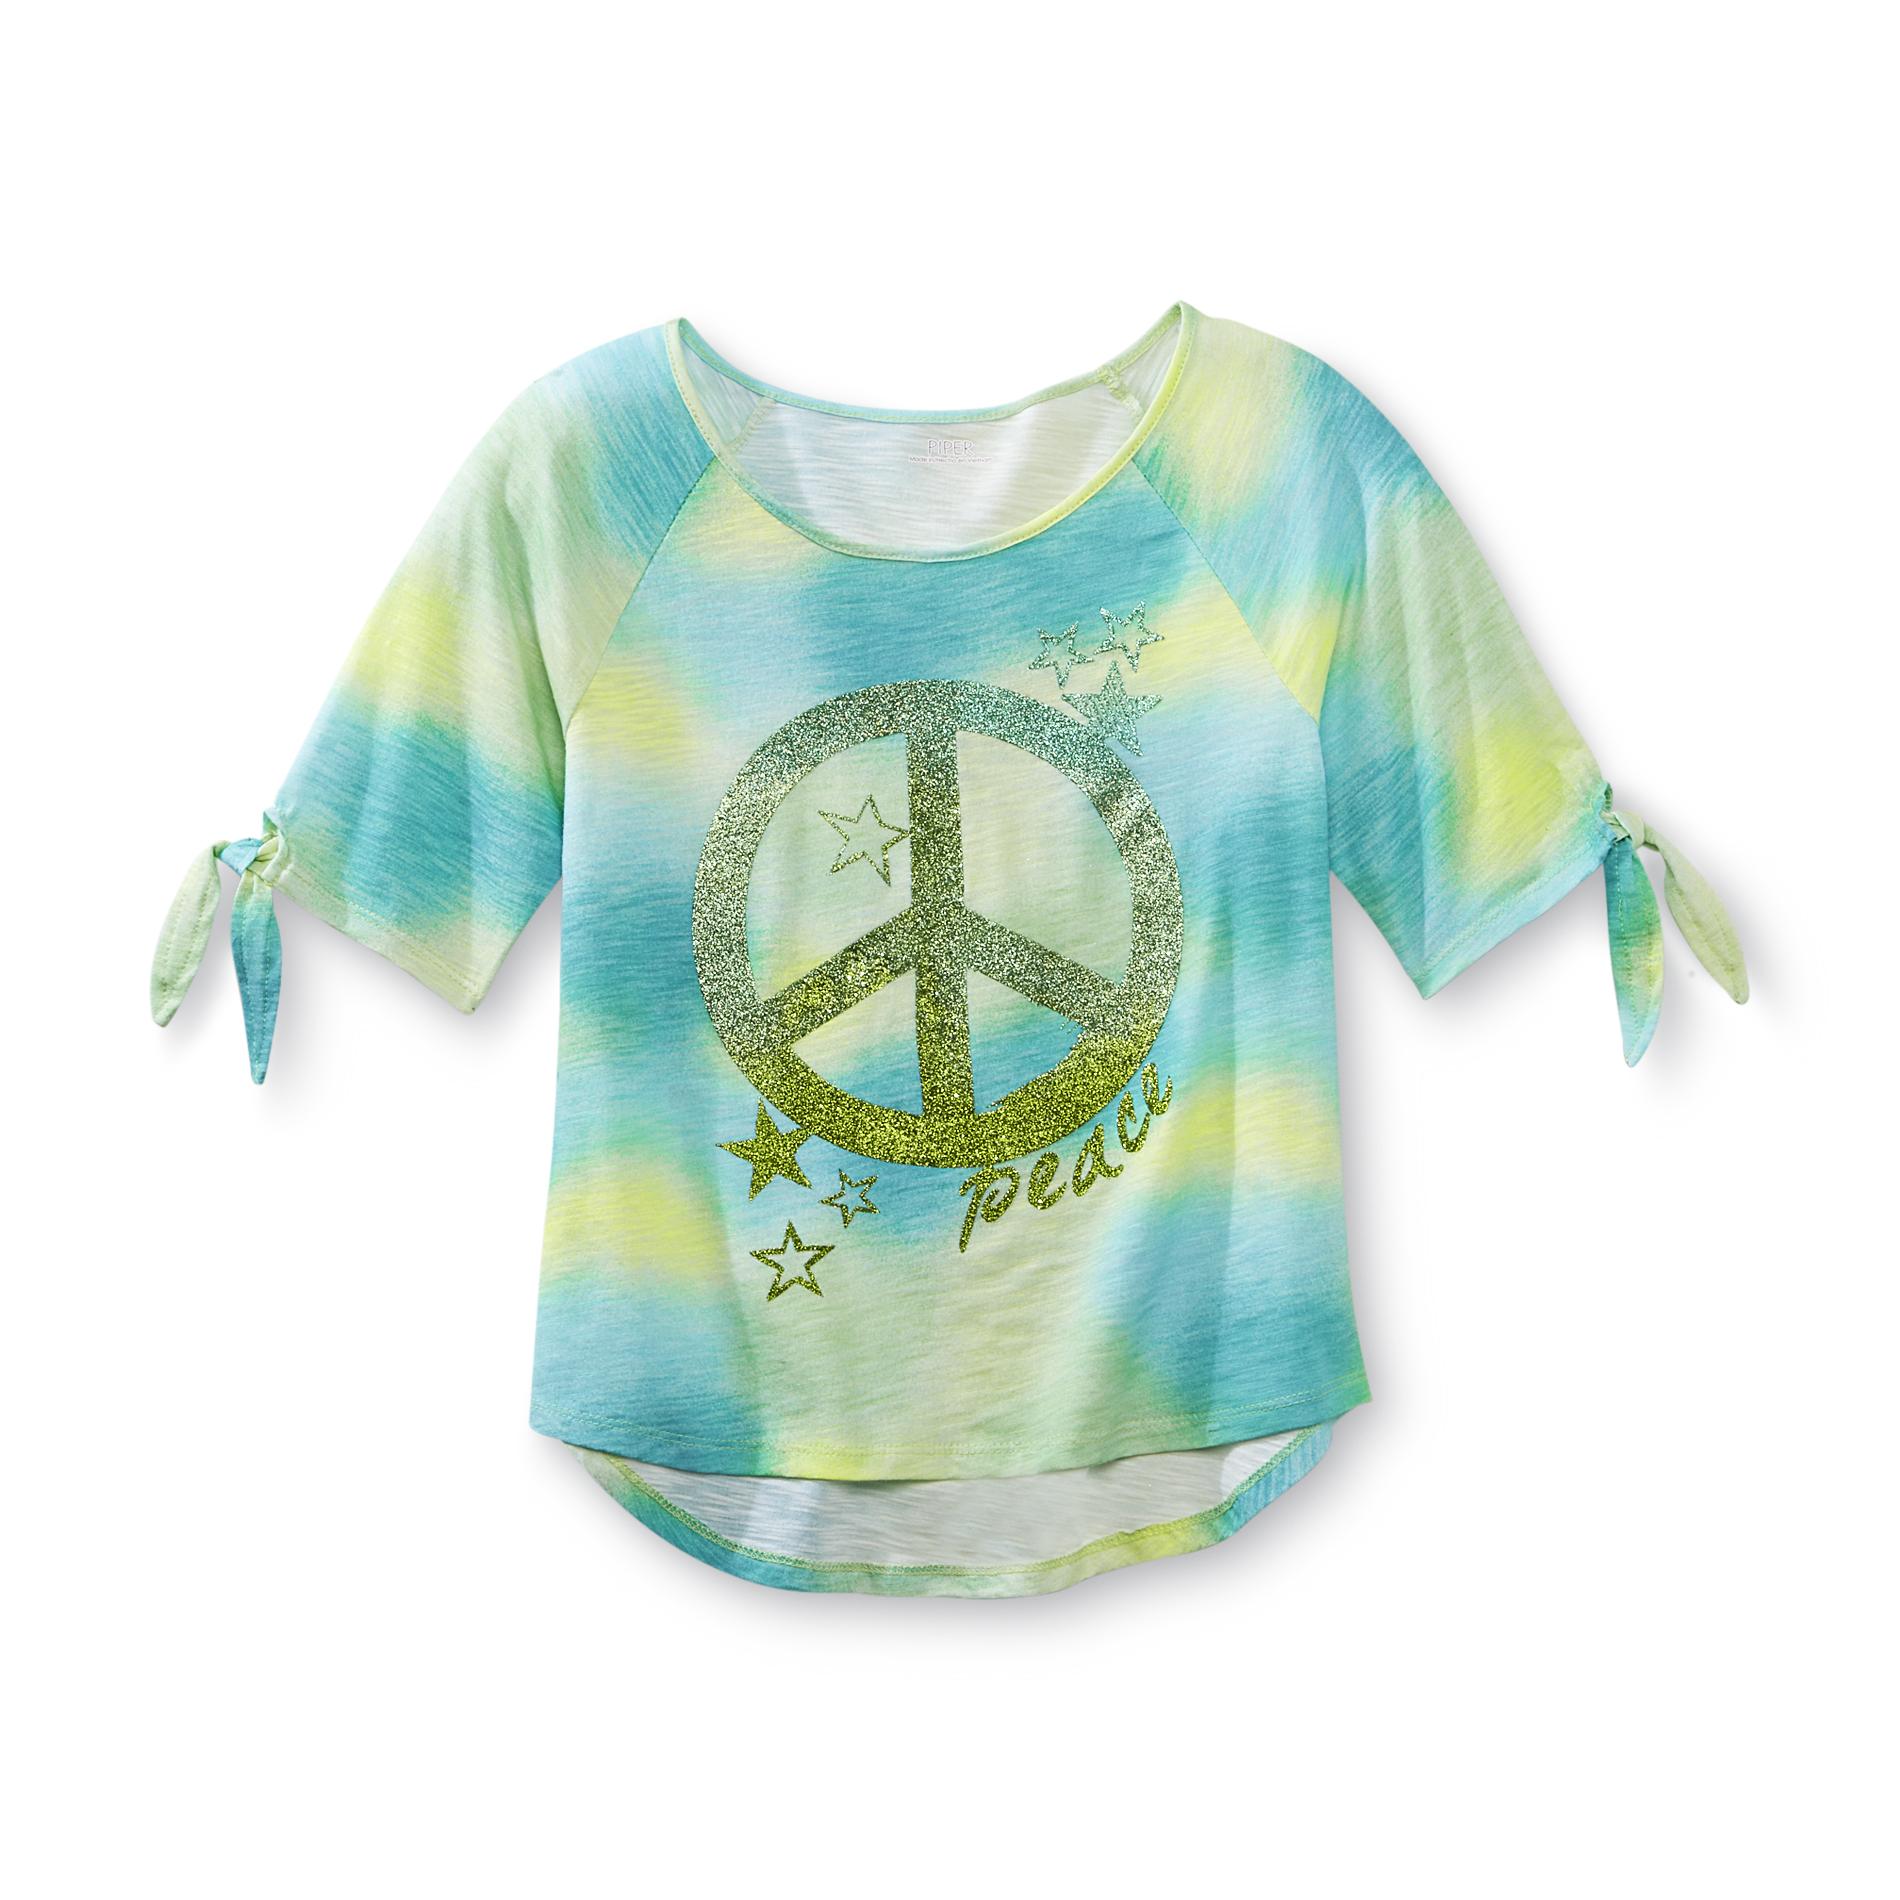 Piper Girl's Dip-Dyed Tie-Sleeve Top - Glitter Peace